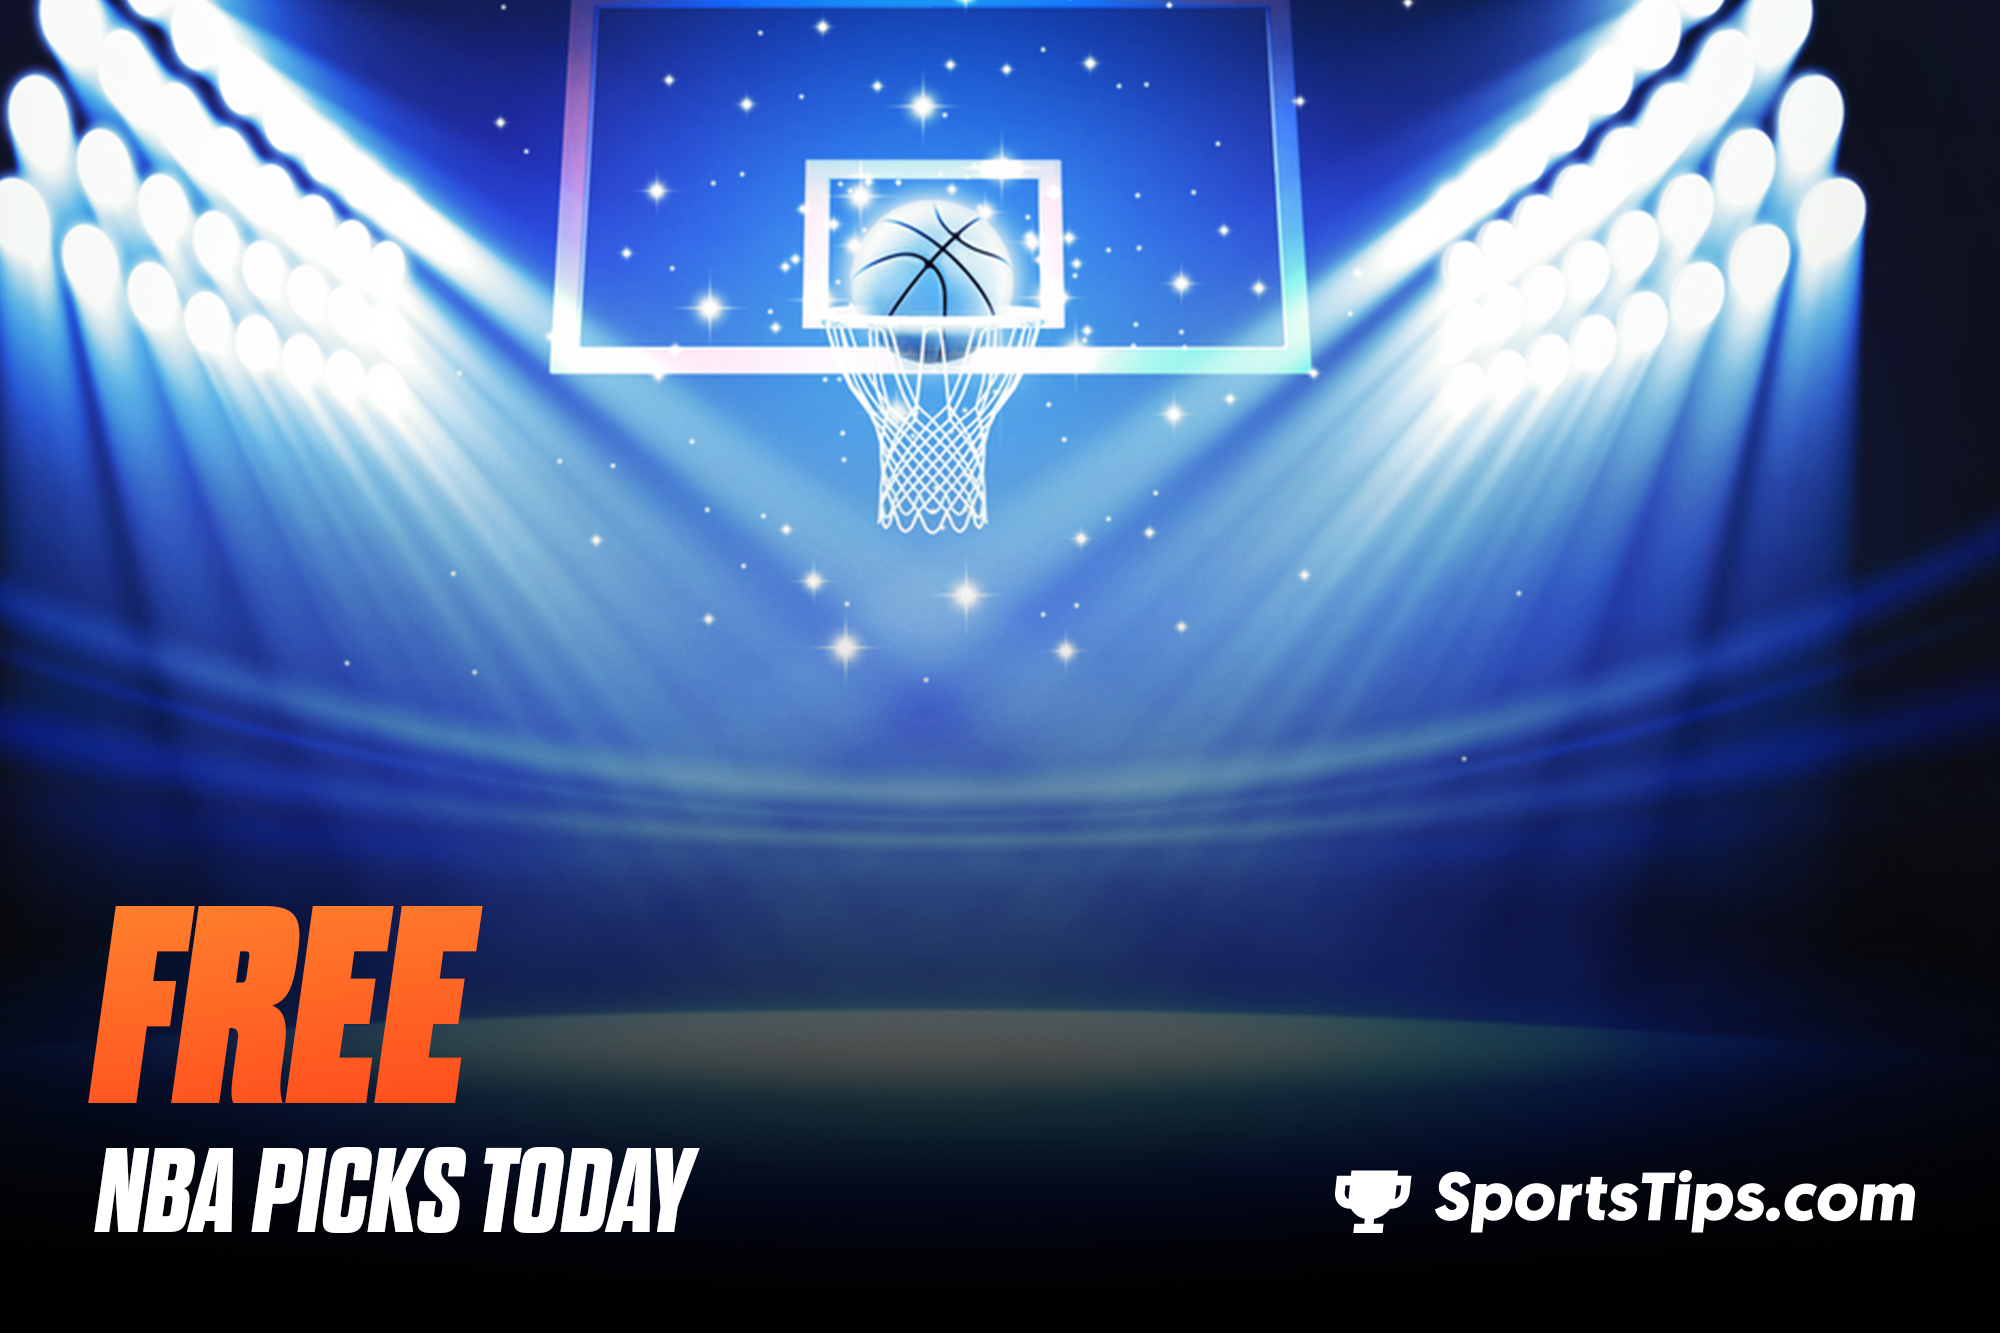 NBA Playoffs Round 1: Free NBA Picks Today for Sunday, April 16th, 2023